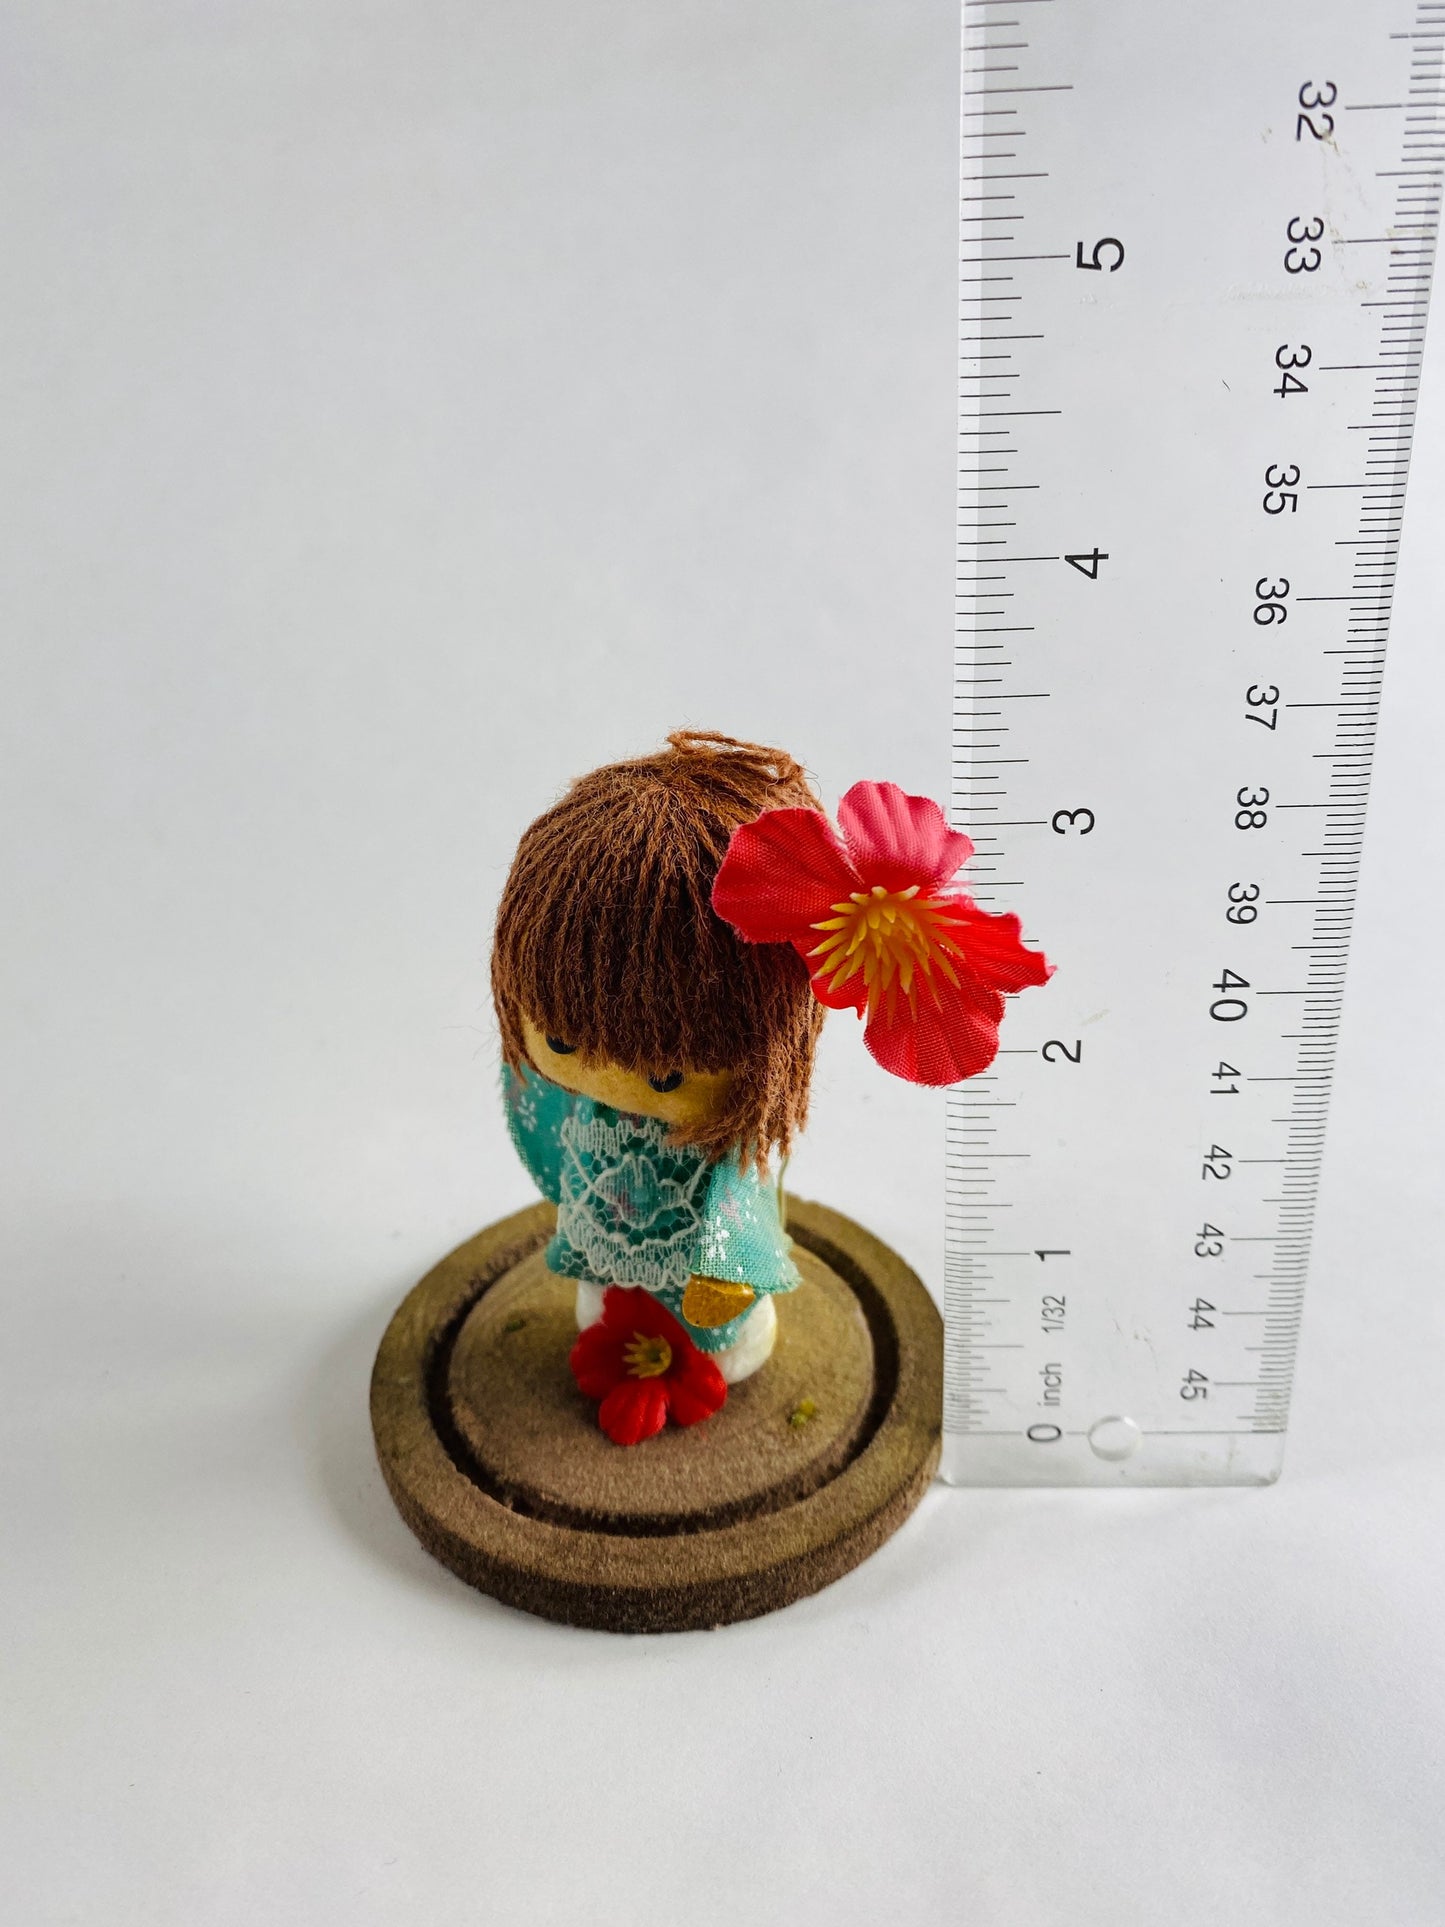 Vintage doll circa 1960s sad eyes felt girl long brown hair and pink orchid attached to round base Small home bookshelf decor hula souvenir